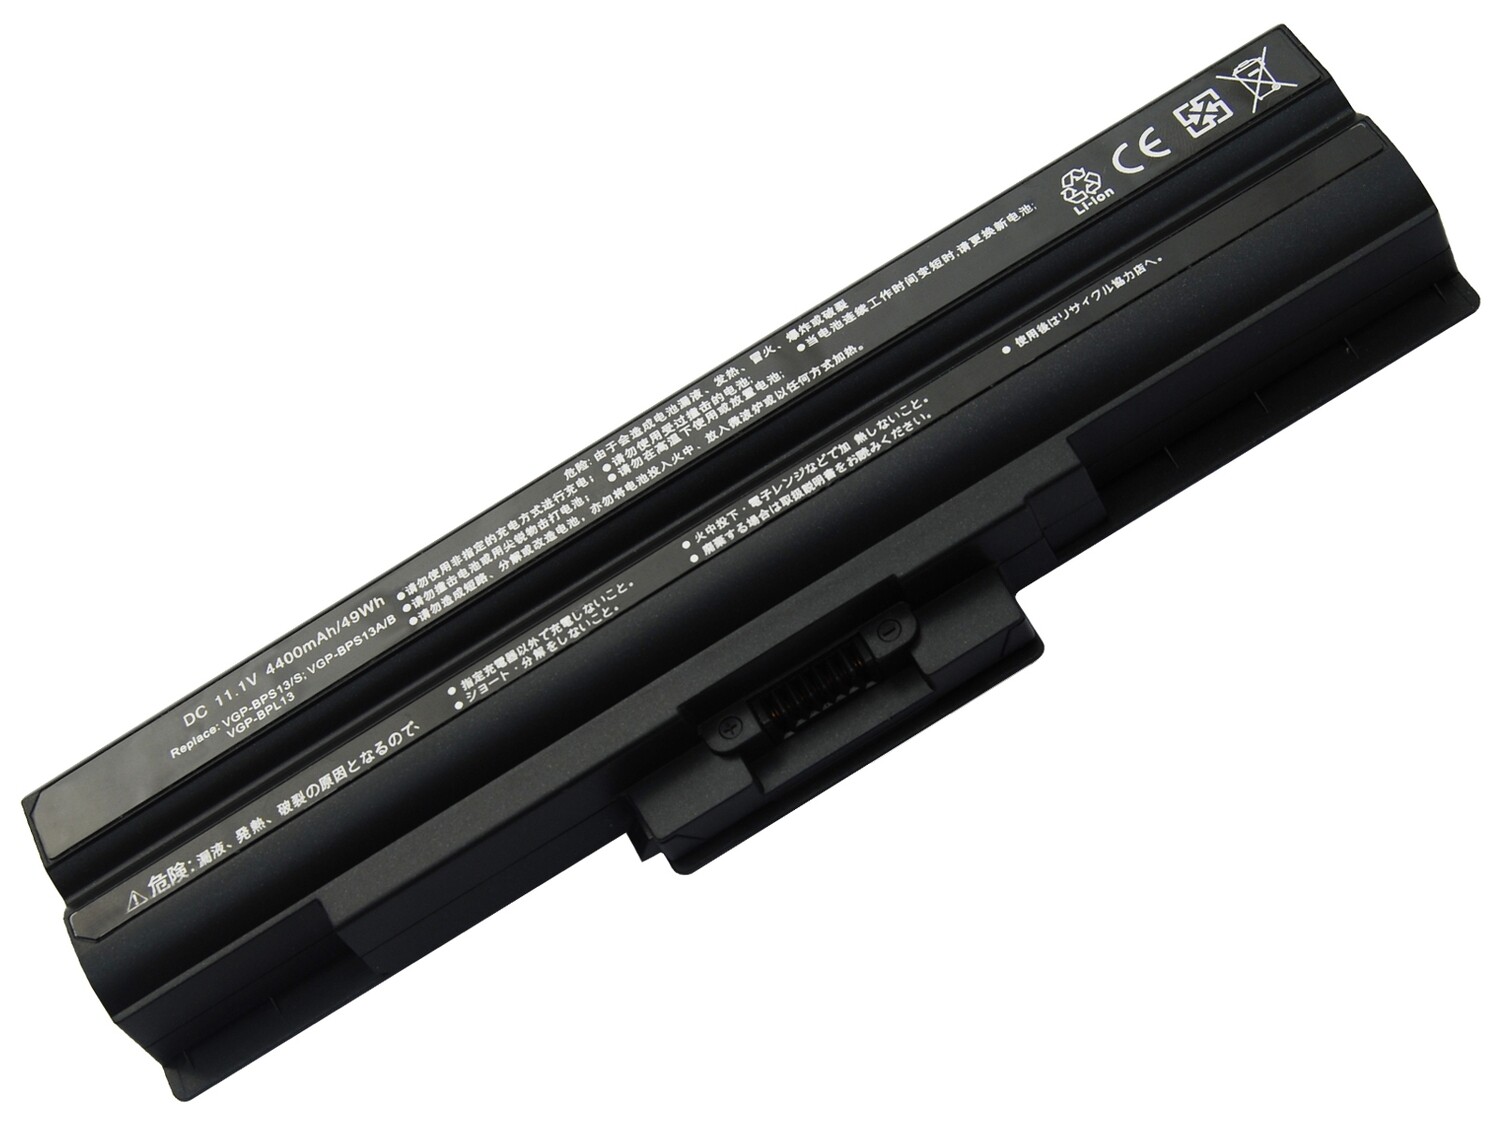 Sony VPC Y11 Y21 YA15 bps13 series compatible laptop battery